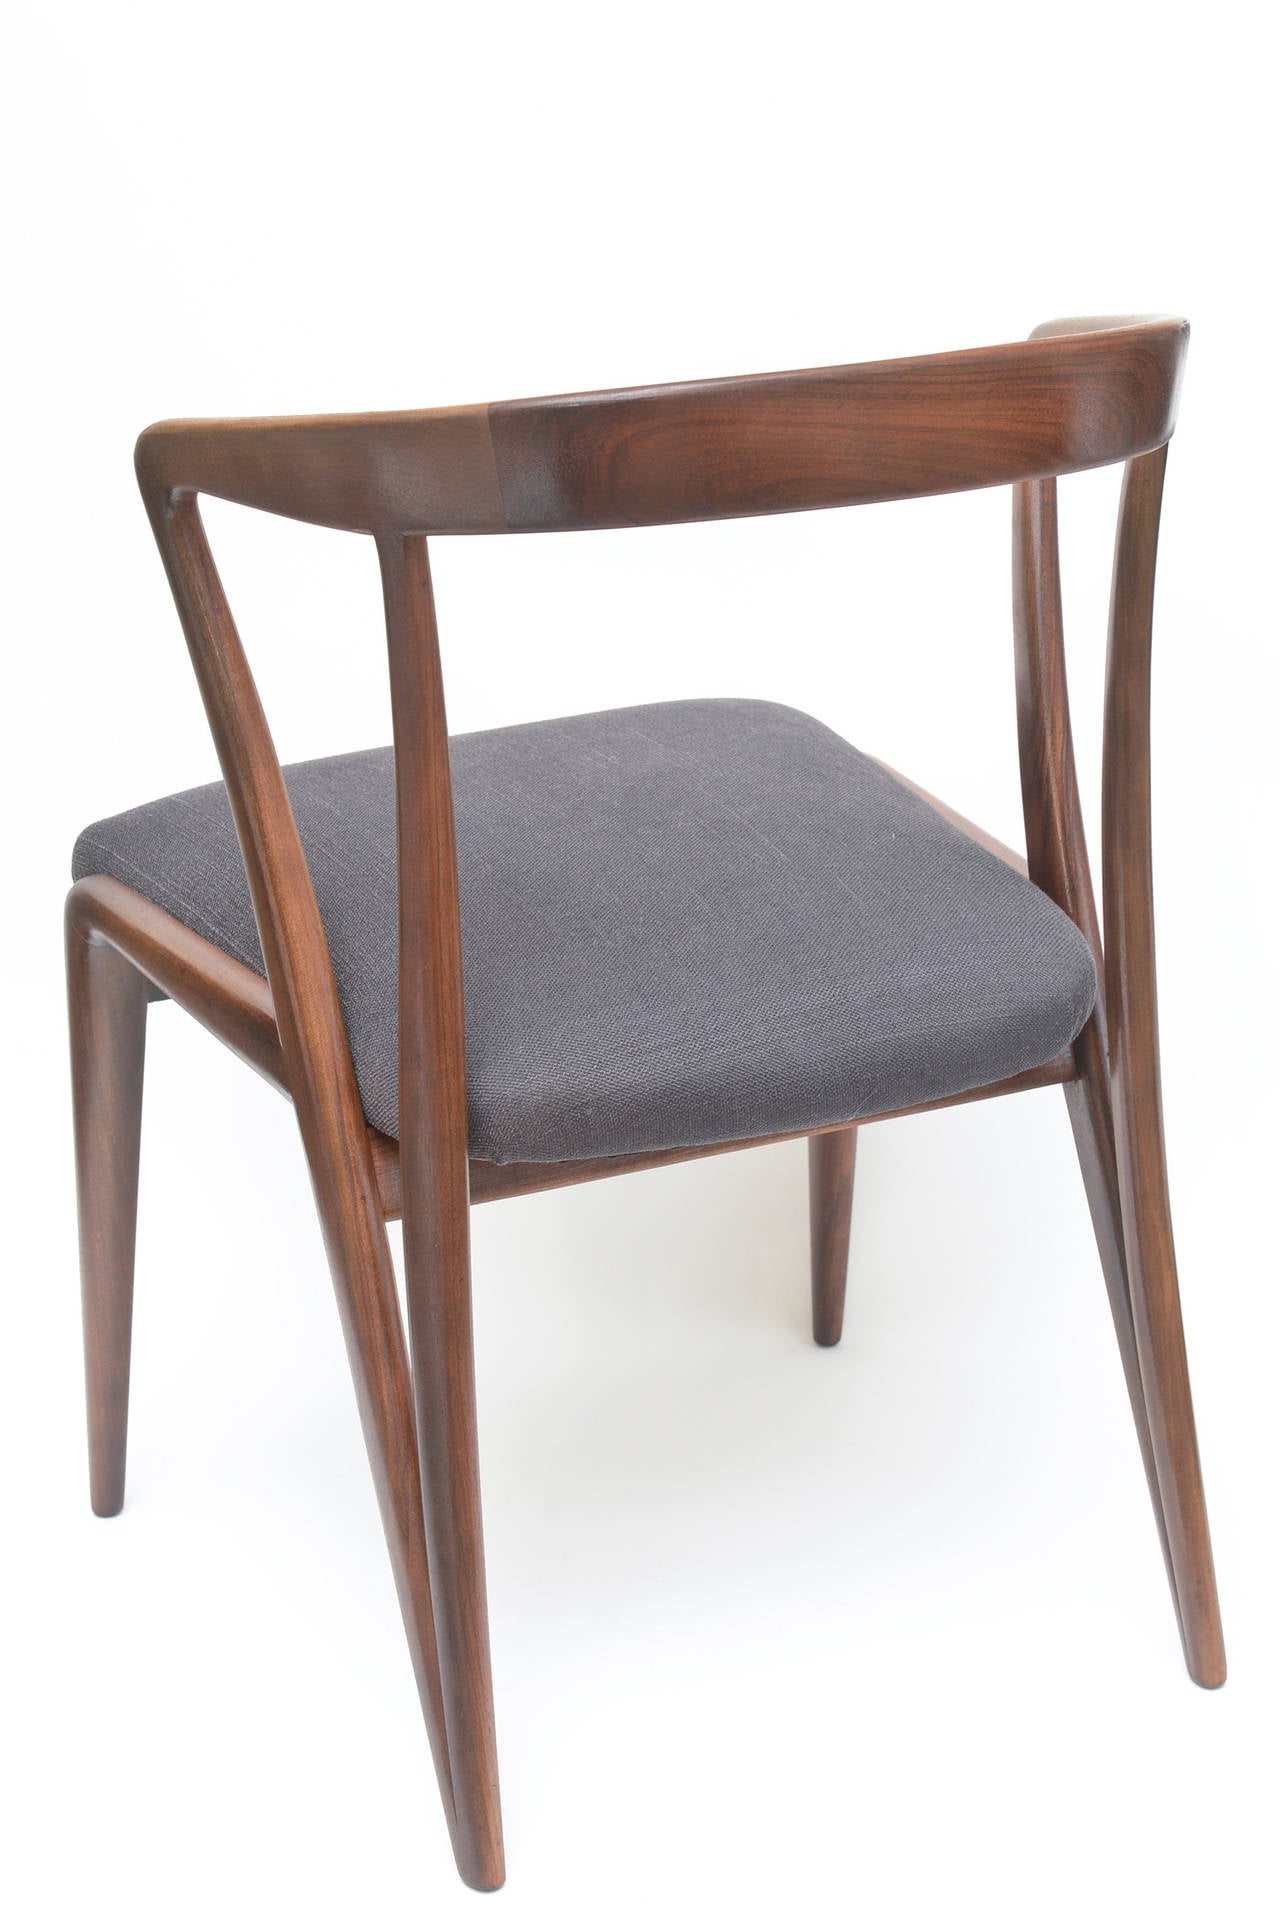 Upholstery Ponti Style Sculptural  Matchbook Wood Side or Desk Chair